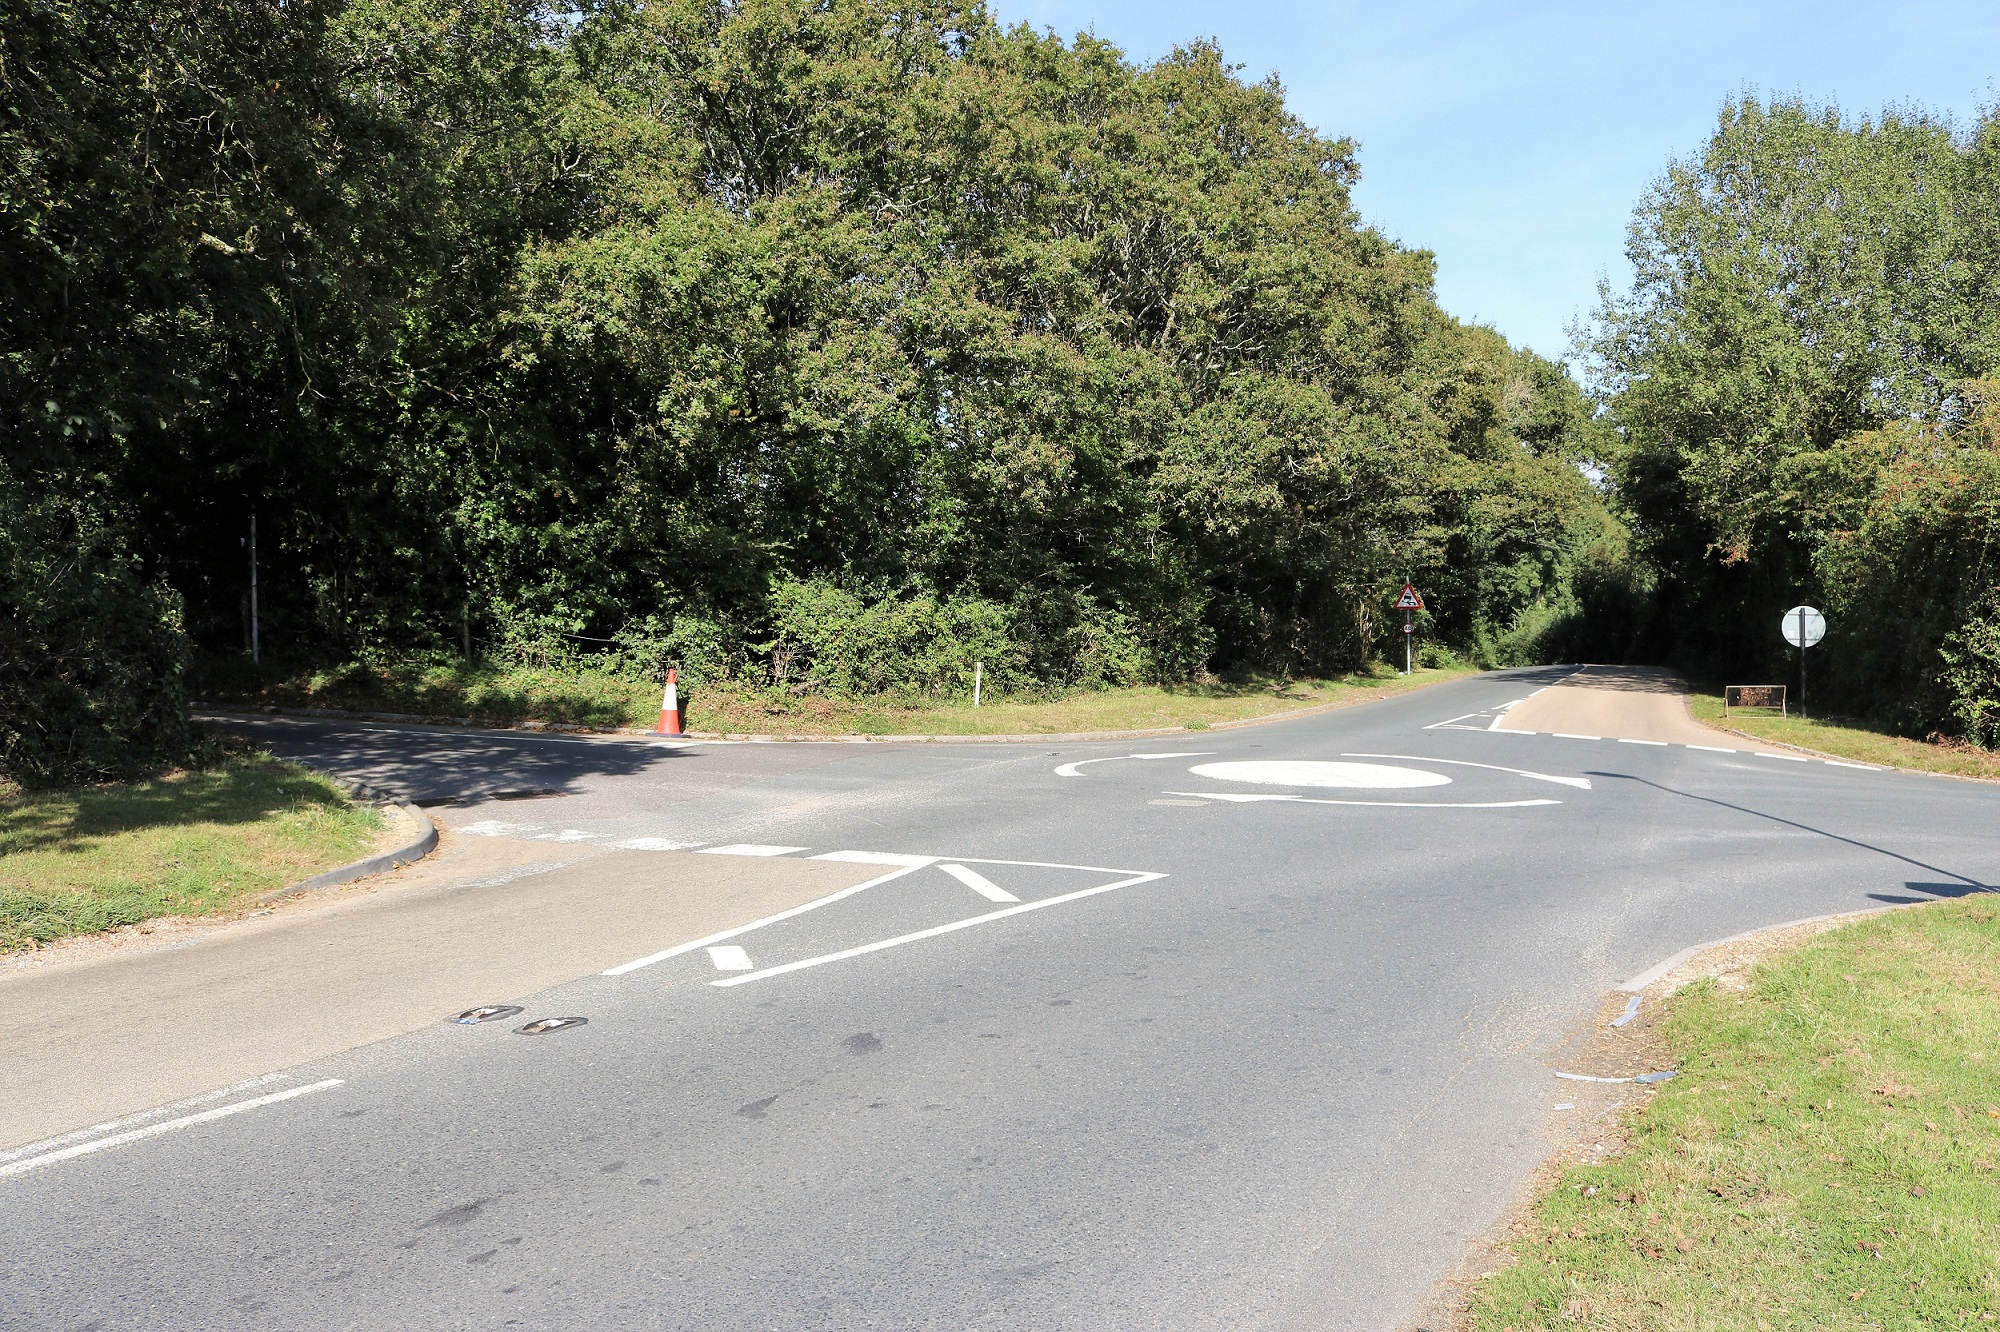 Four way road junction with mini roundabout, trees and hedging bordering the roadside